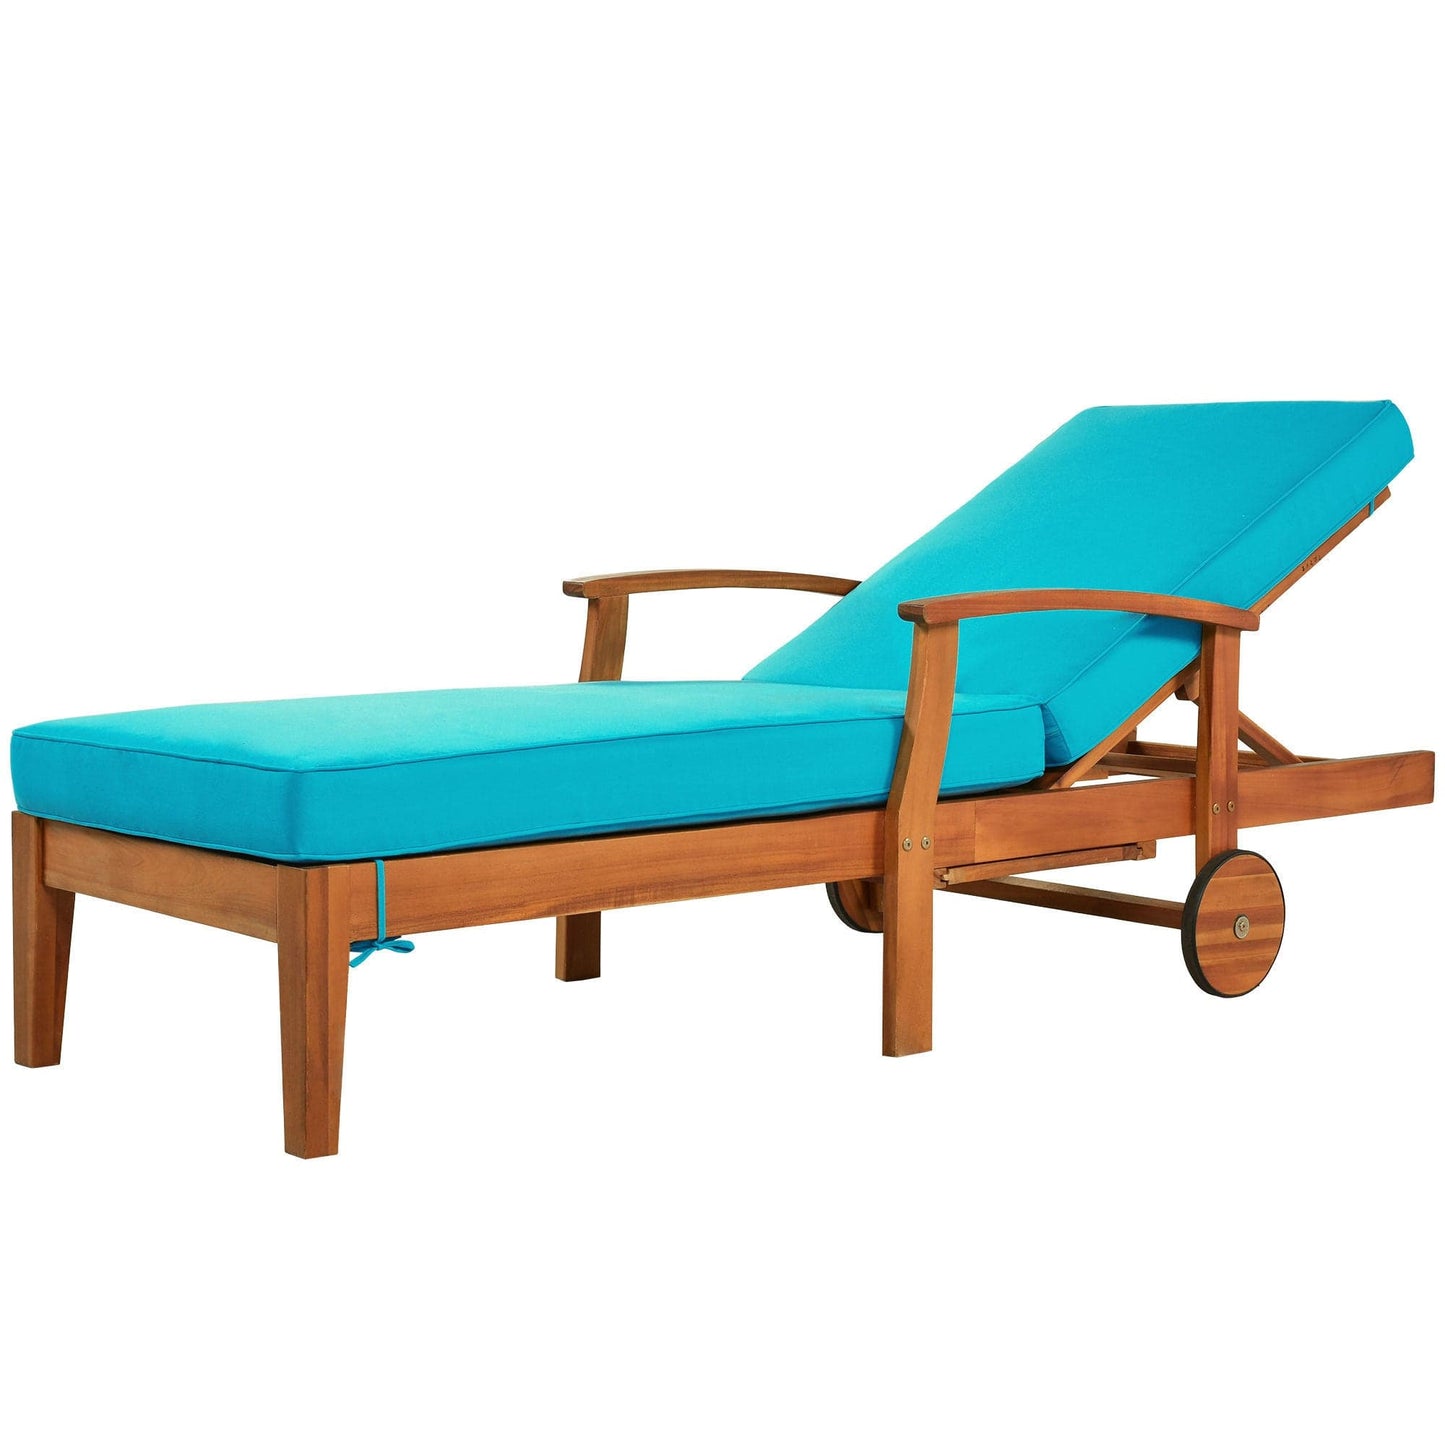 TOPMAX Outdoor Solid Wood 78.8" Chaise Lounge Patio Reclining Daybed with Sliding Cup Table,Wood Finish+Blue Cushion, Set of 2